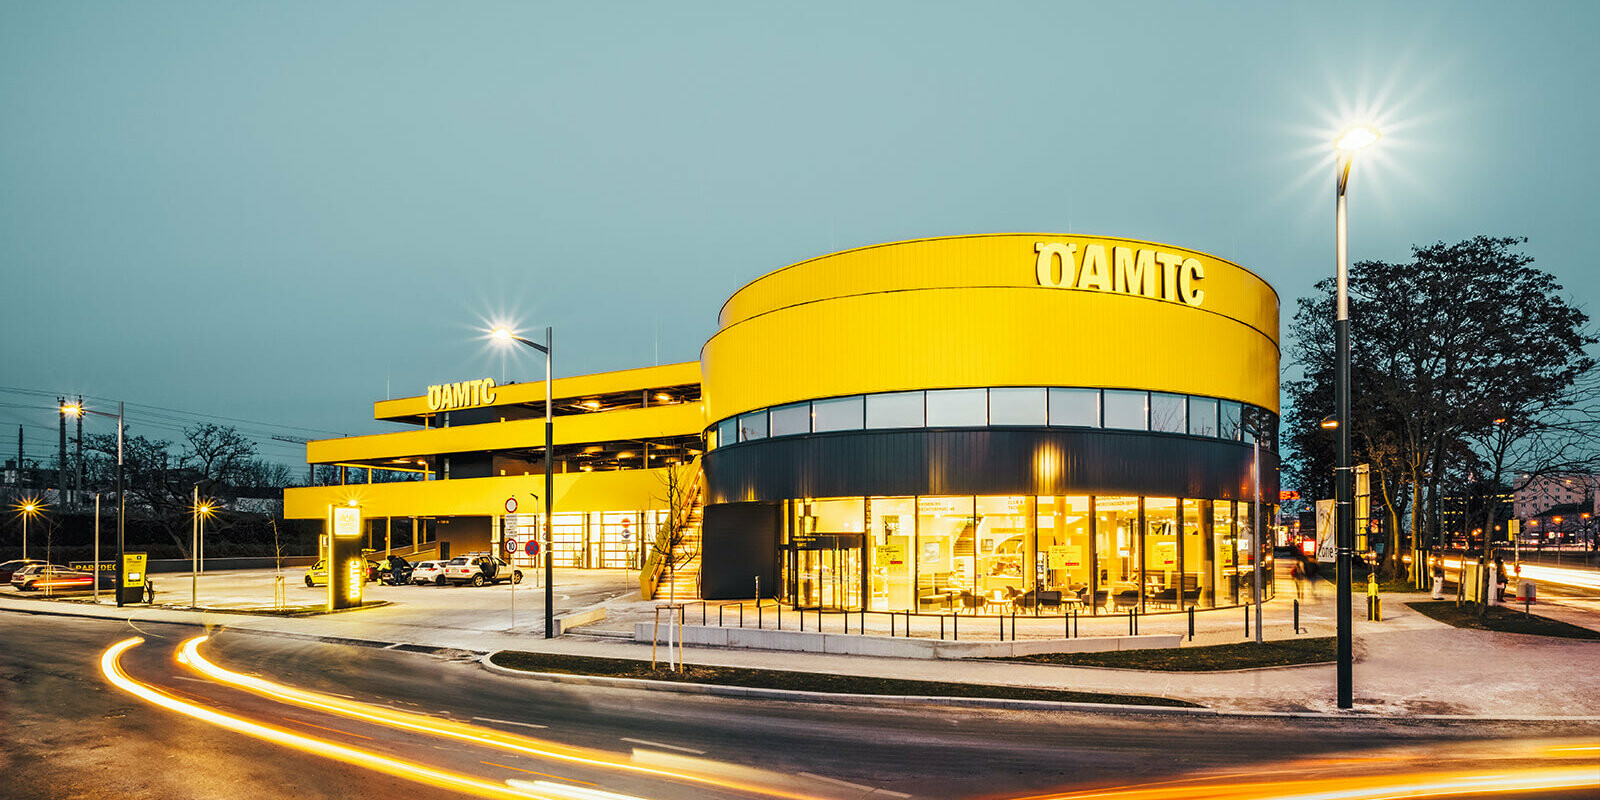 The ÖAMTC Center in Vienna by night. The building is covered in PREFA Sidings in the colour rapeseed yellow.